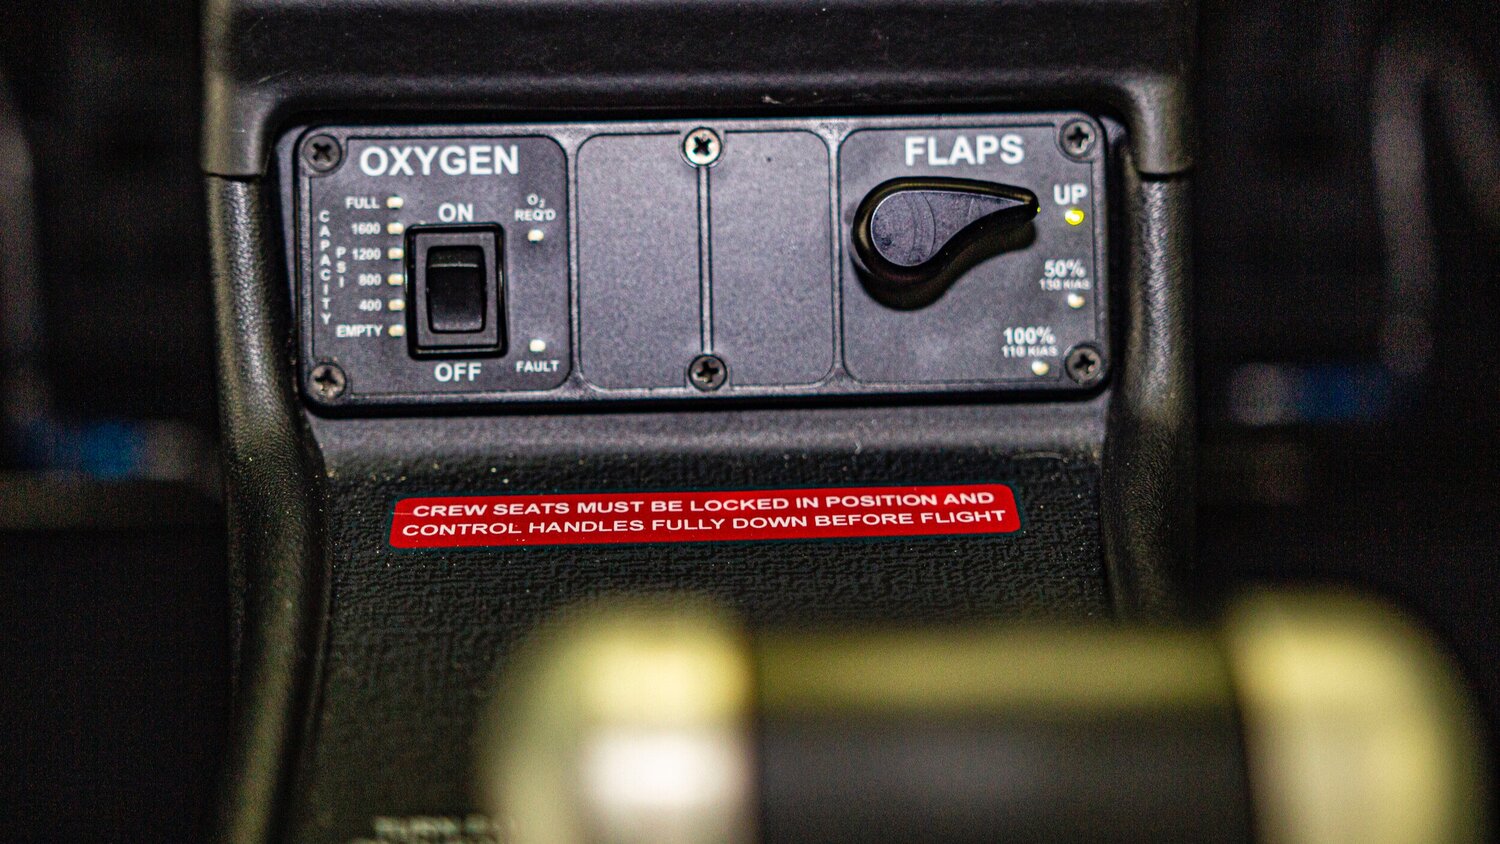 The safe way to fly high! Get above 12,500MSL with a convenient oxygen distribution system built right into the aircraft. This lets you take on the flight levels and expand your options when choosing winds aloft. | 14CFR § 91.211